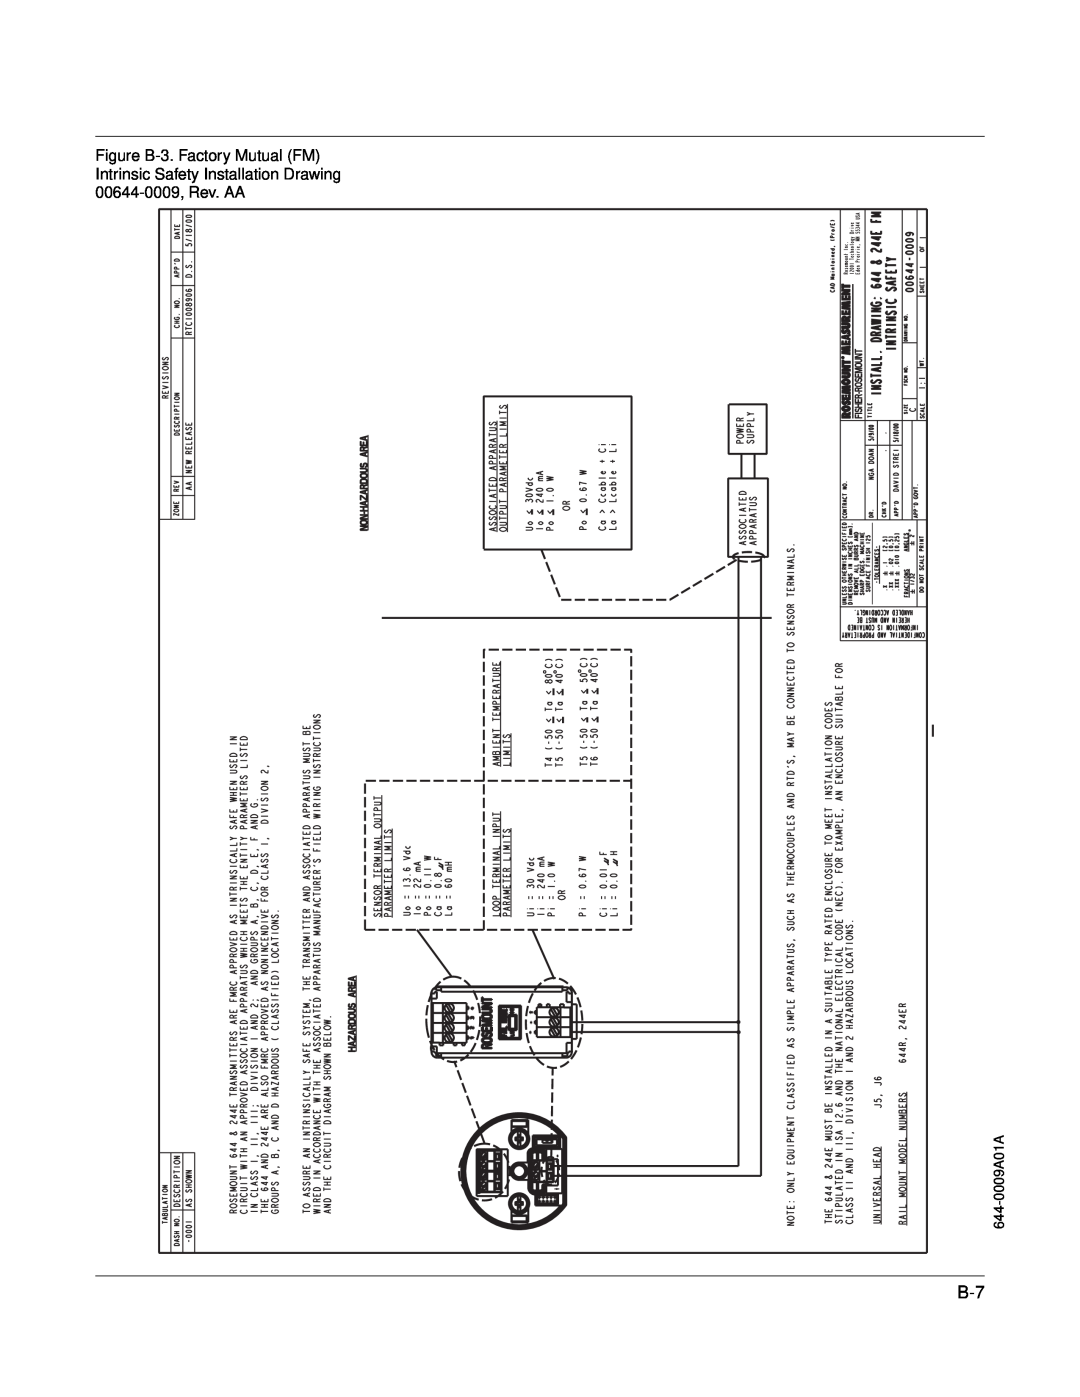 Fisher 244EH, 244ER manual Figure B-3. Factory Mutual FM Intrinsic Safety Installation Drawing, 00644-0009, Rev. AA 